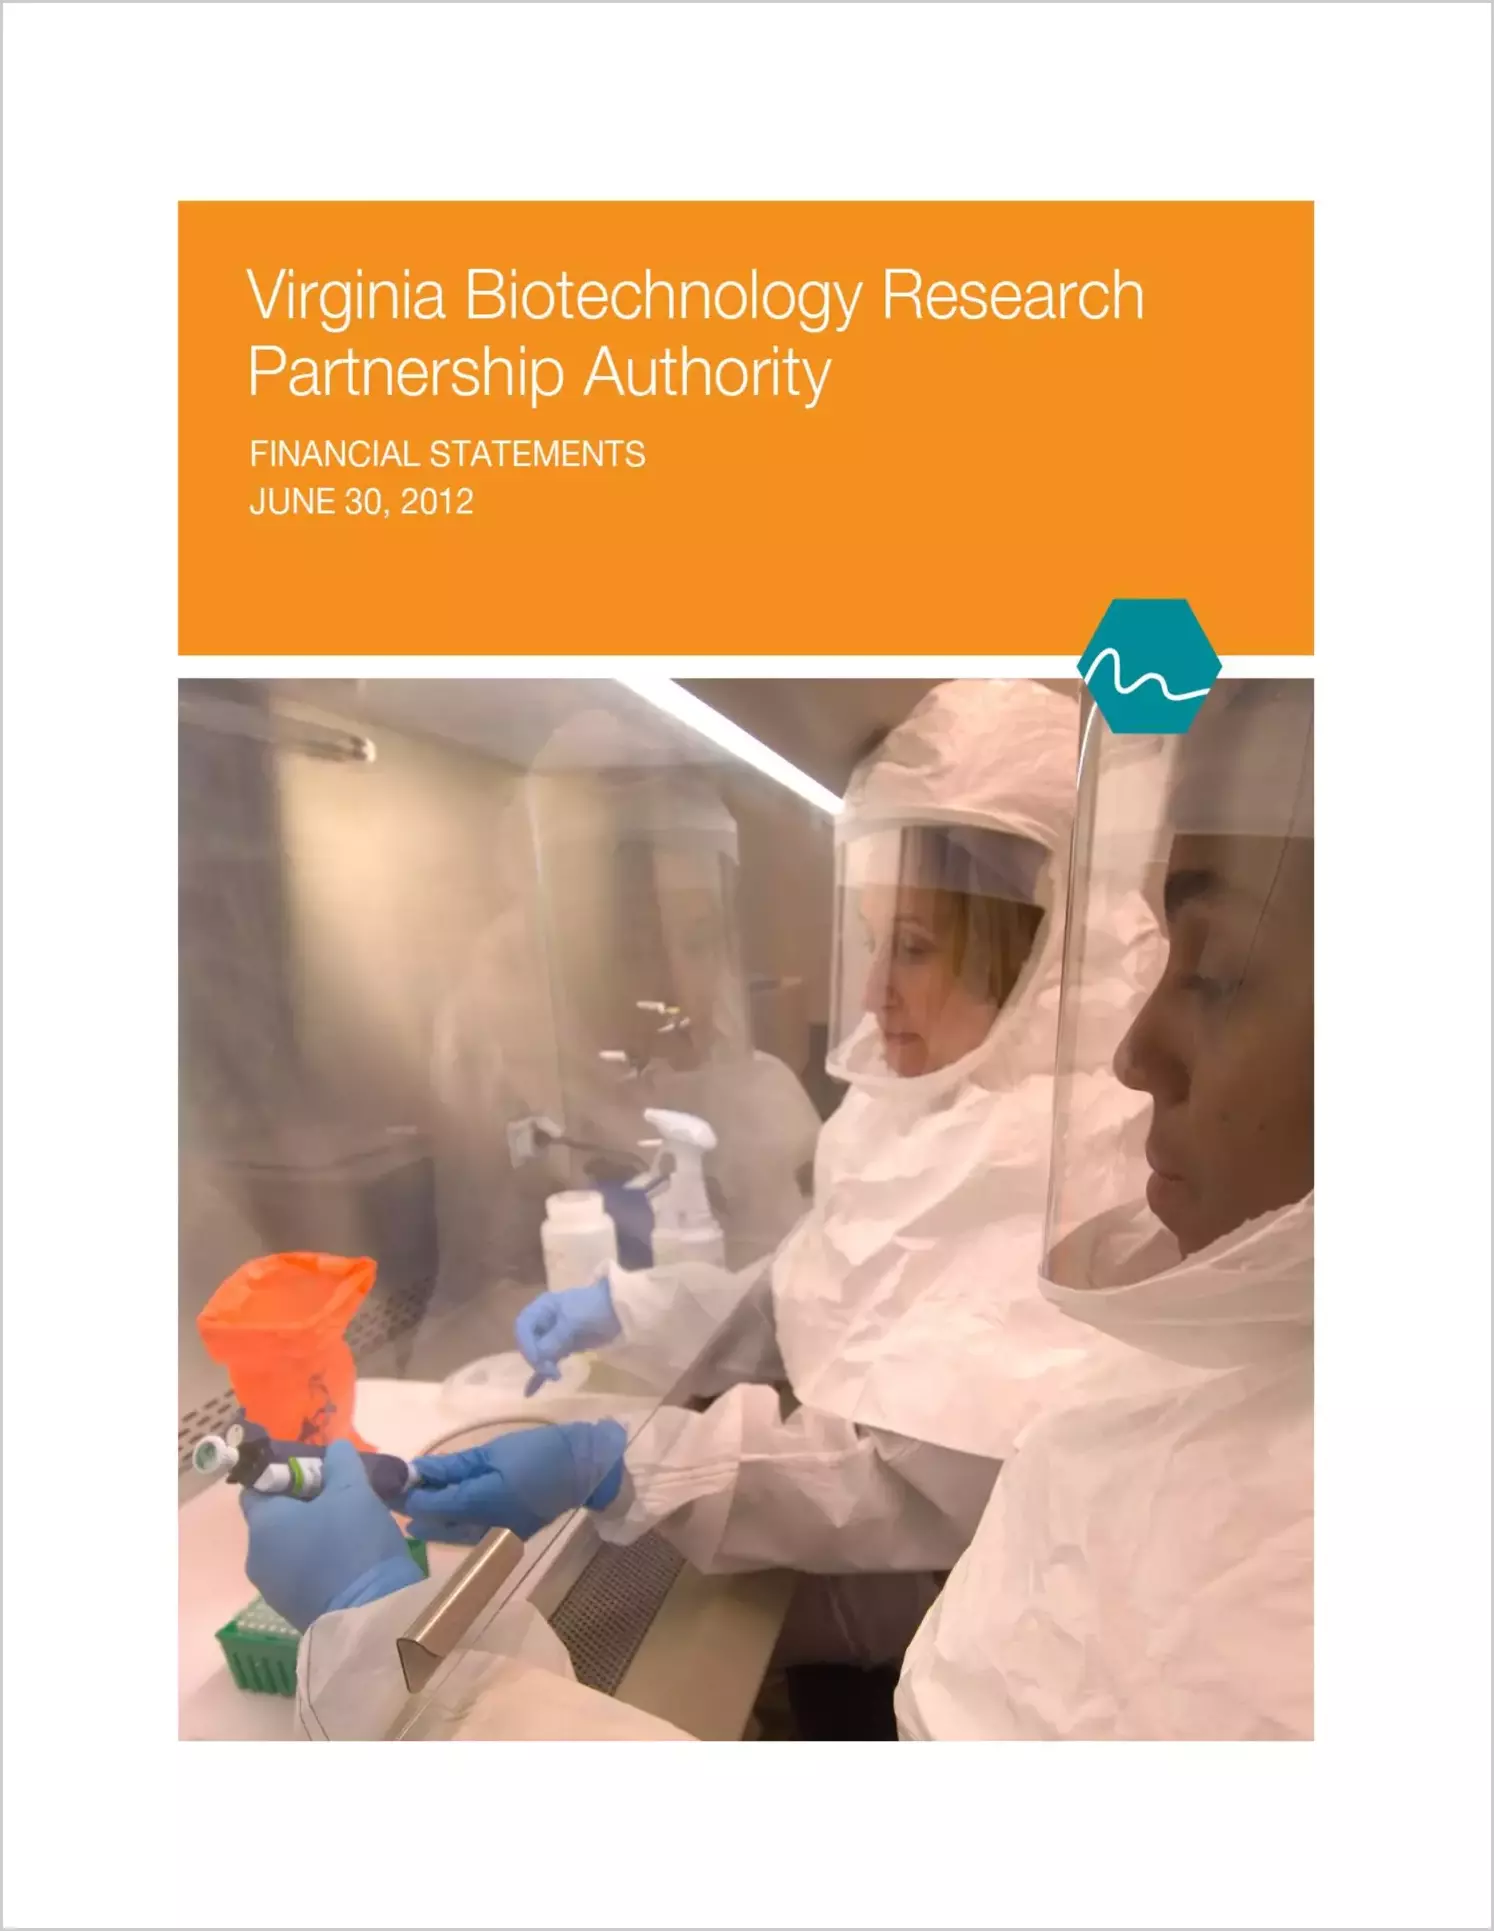 Virginia Biotechnology Research Partnership Authority Financial Statements for the year ended June 30, 2012